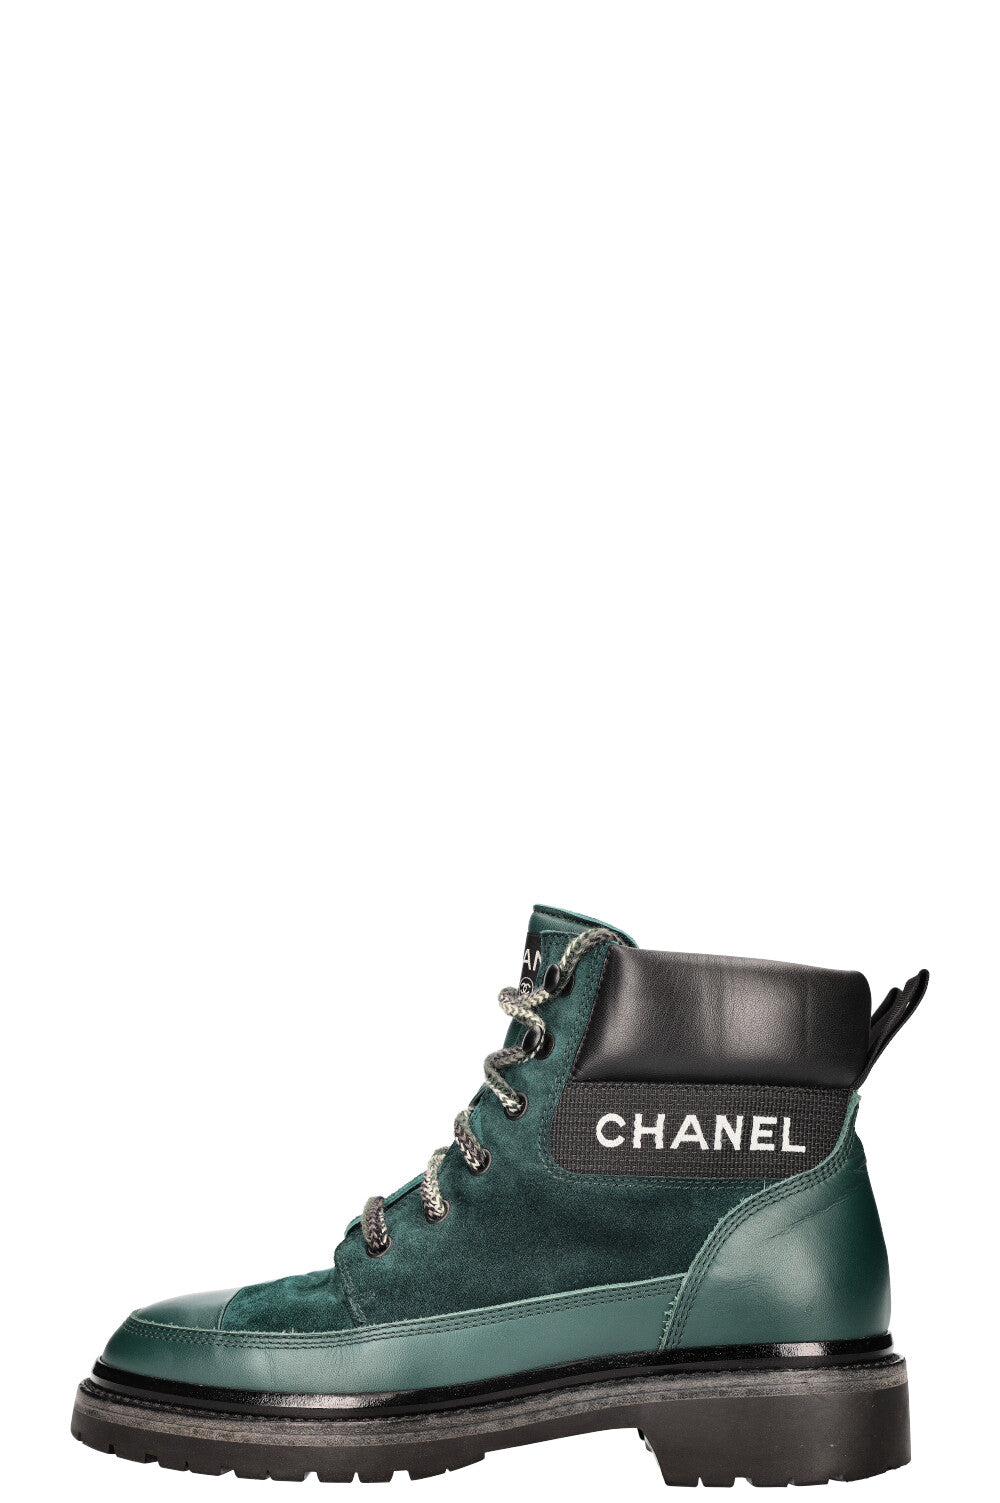 CHANEL Hiking Boots Suede Petrol